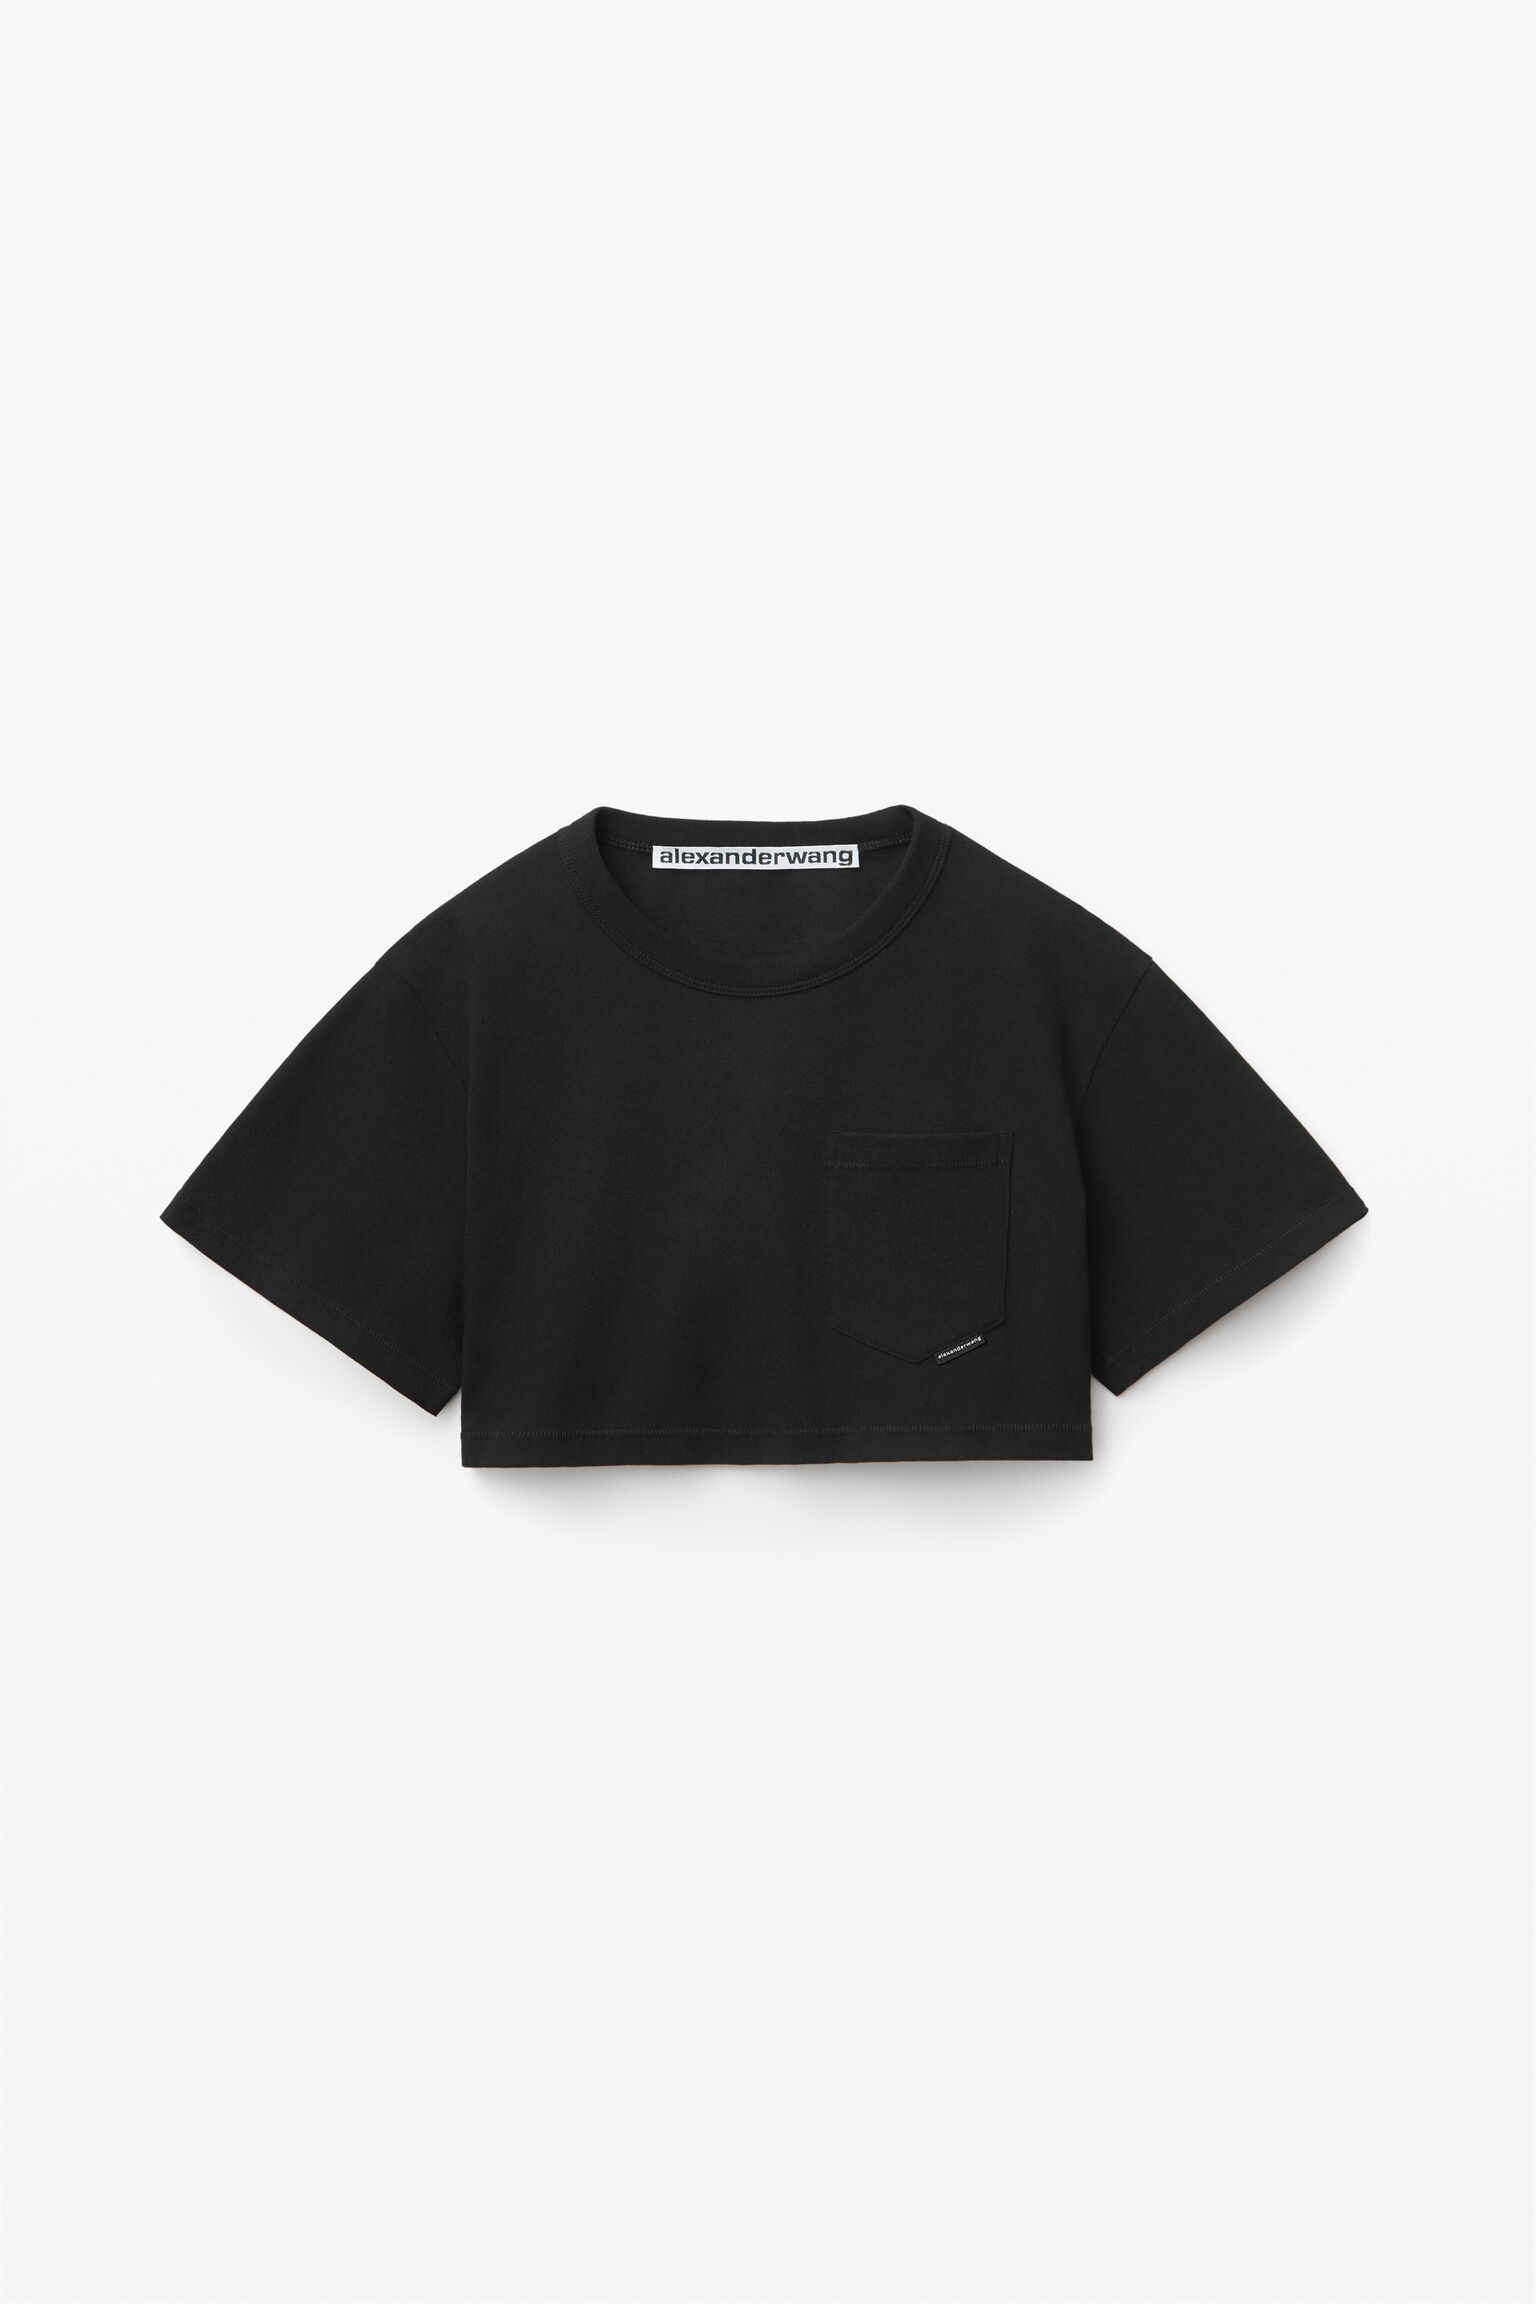 Alexander Wang Cropped T-shirt with Molded Cups (€405) via